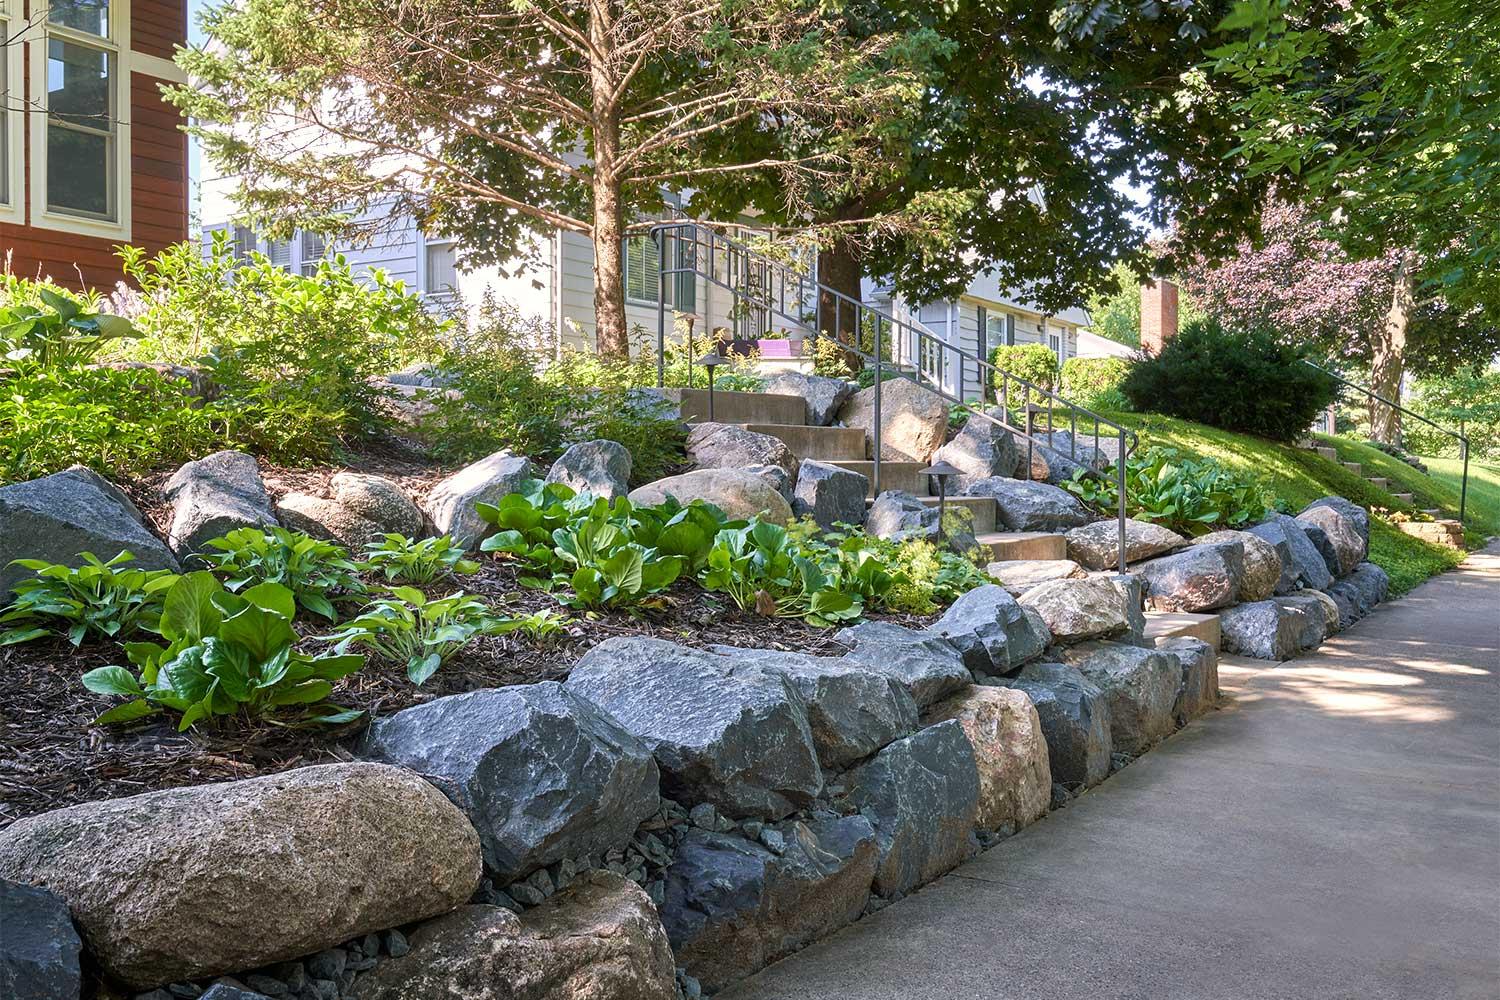 Terraced boulder retaining wall garden planted with hostas and other low-maintenance northwoods perennials.